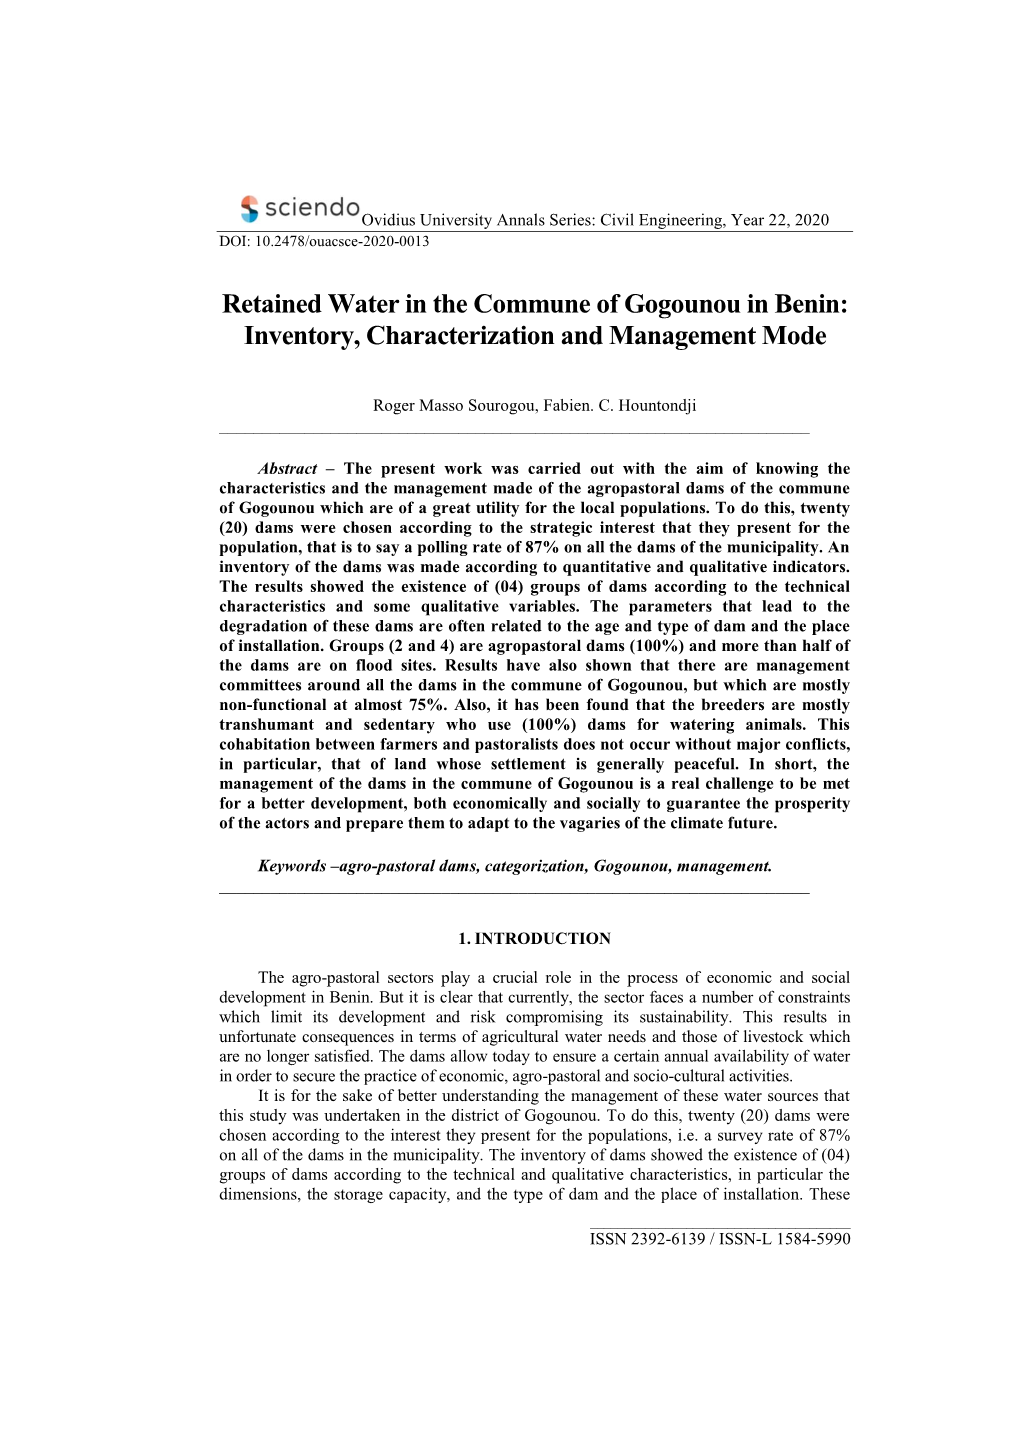 Retained Water in the Commune of Gogounou in Benin: Inventory, Characterization and Management Mode